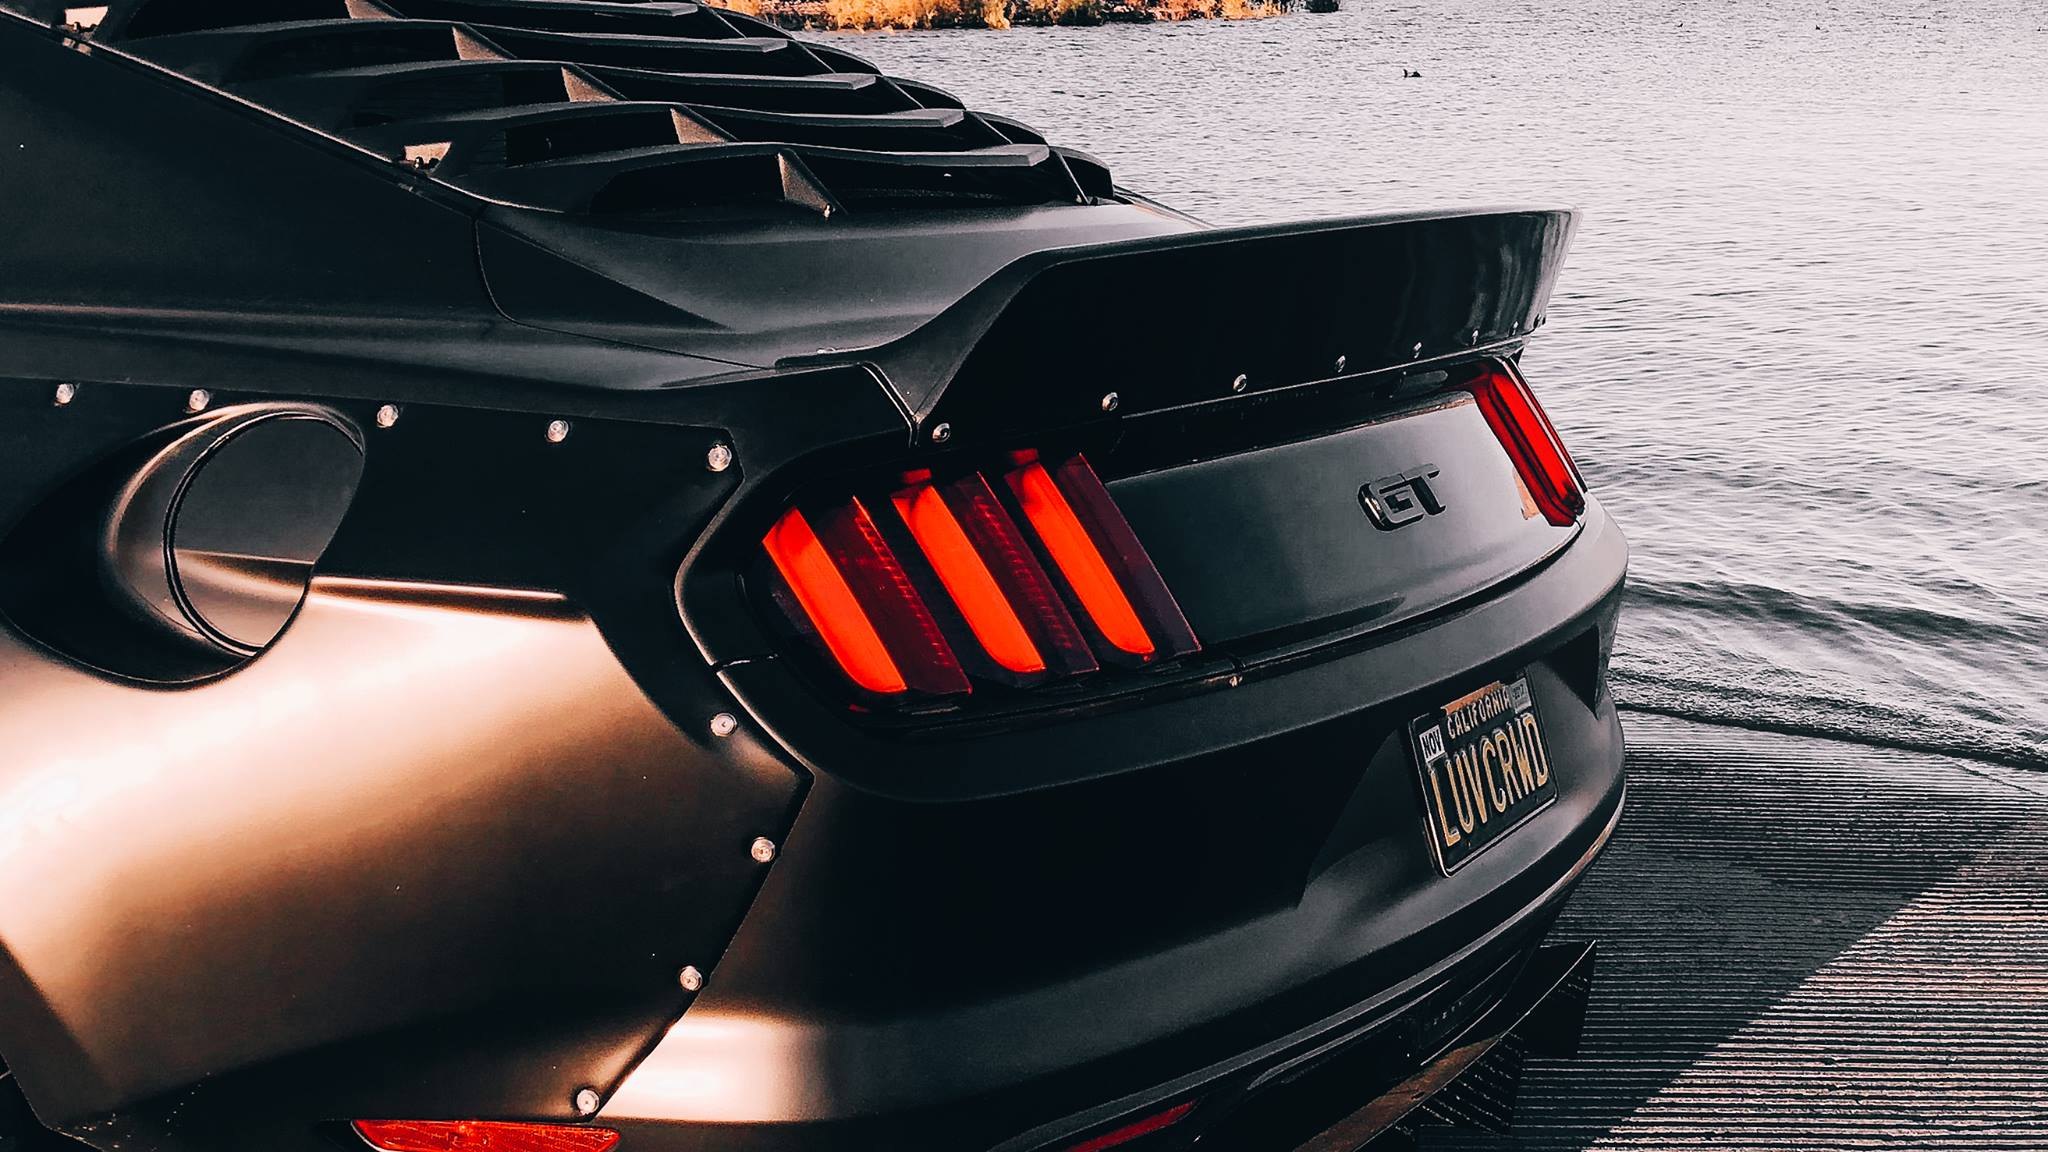 Aftermarket Rear Spoiler on Black Ford Mustang GT - Photo by Clinched